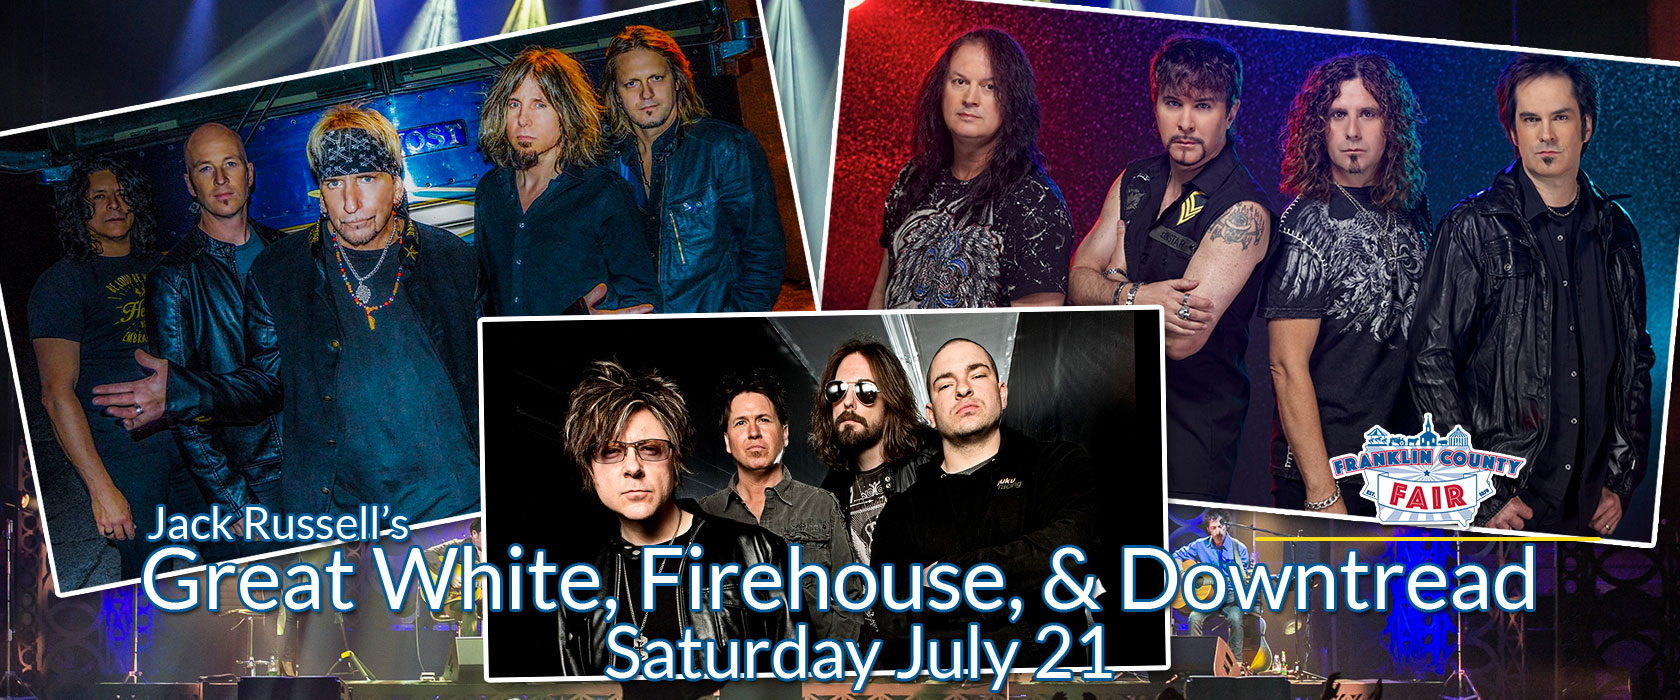 Great White and Firehouse Slide Image